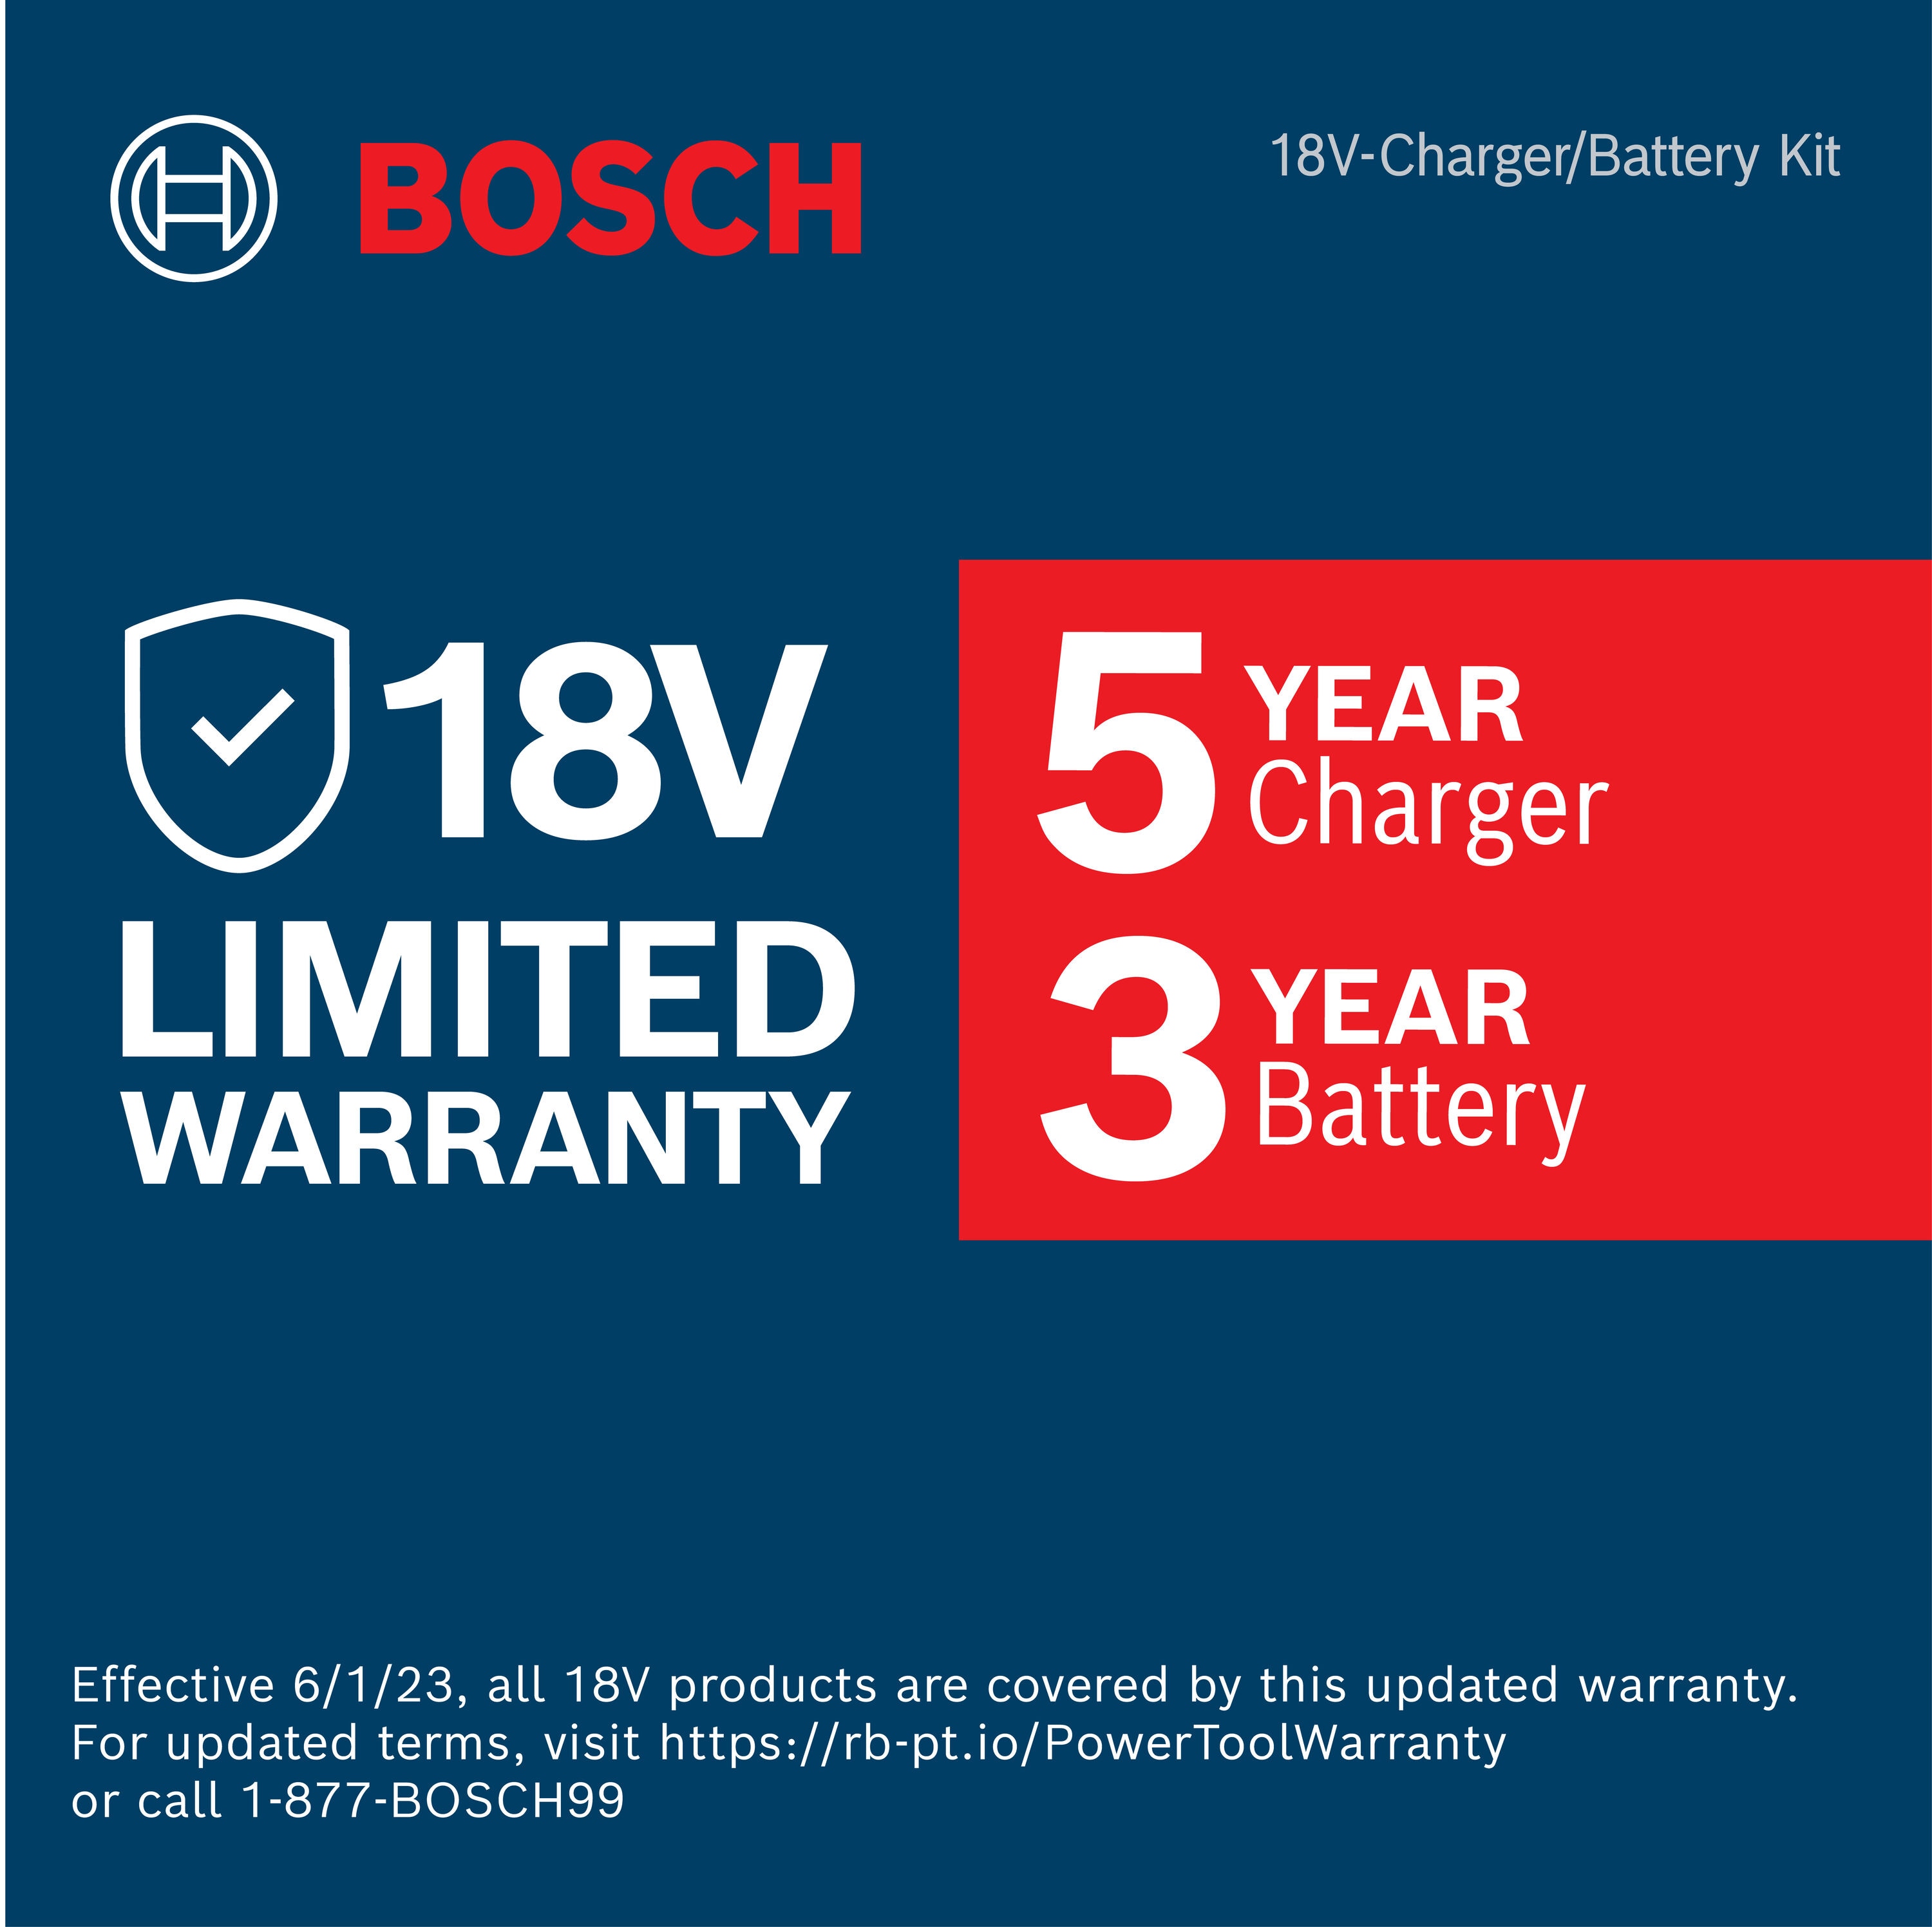 Bosch 18-V 4 Amp-Hour; Lithium Battery Kit (Charger Included) in